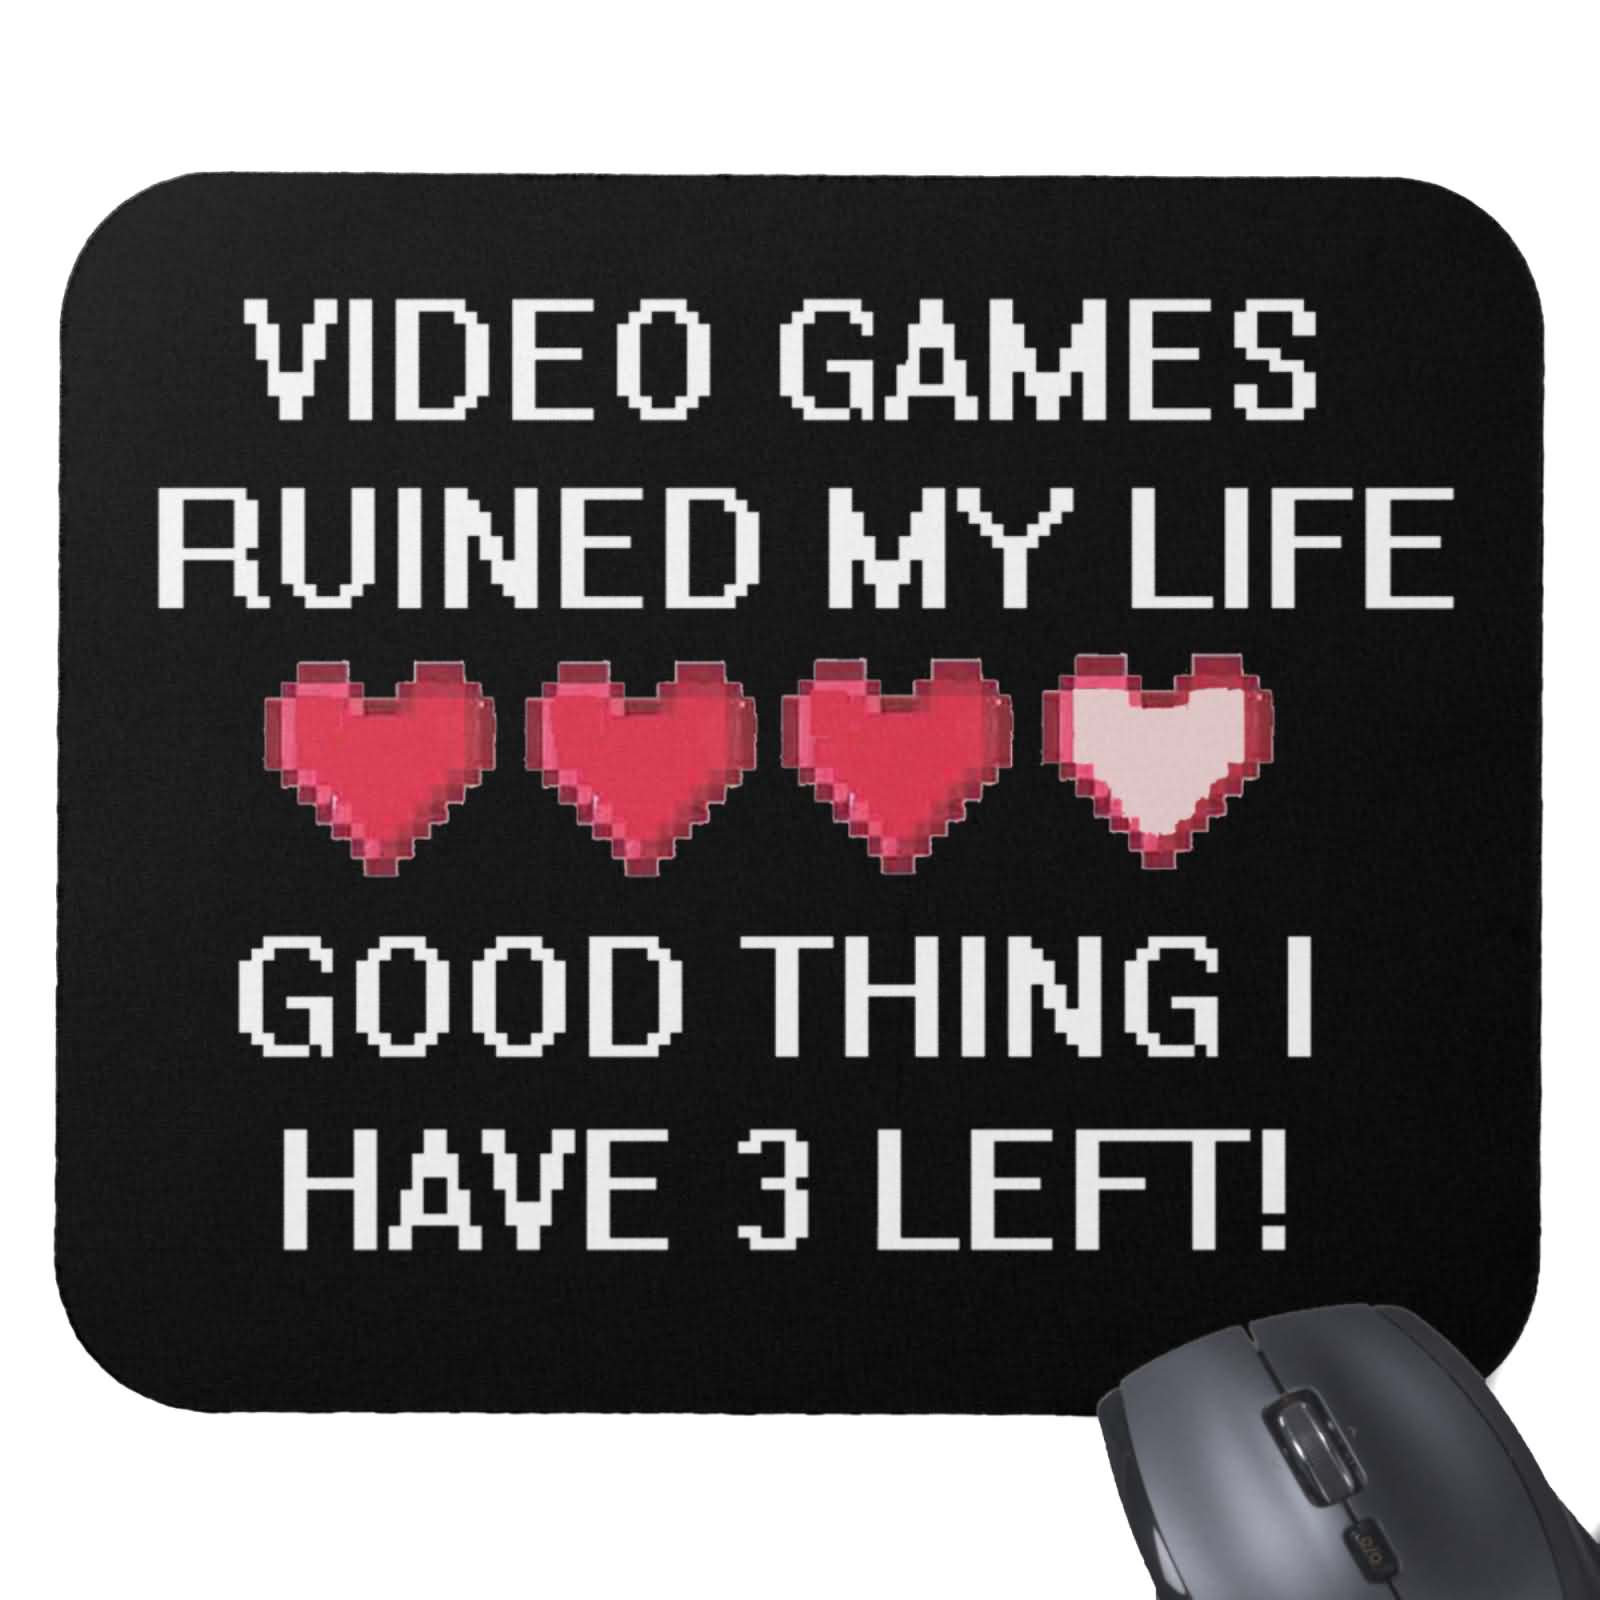 Are ruining my life. School ruined my Life нашивка. Ruin my Life перевод. Happy National videogame Day. Apologize for ruining my Life.